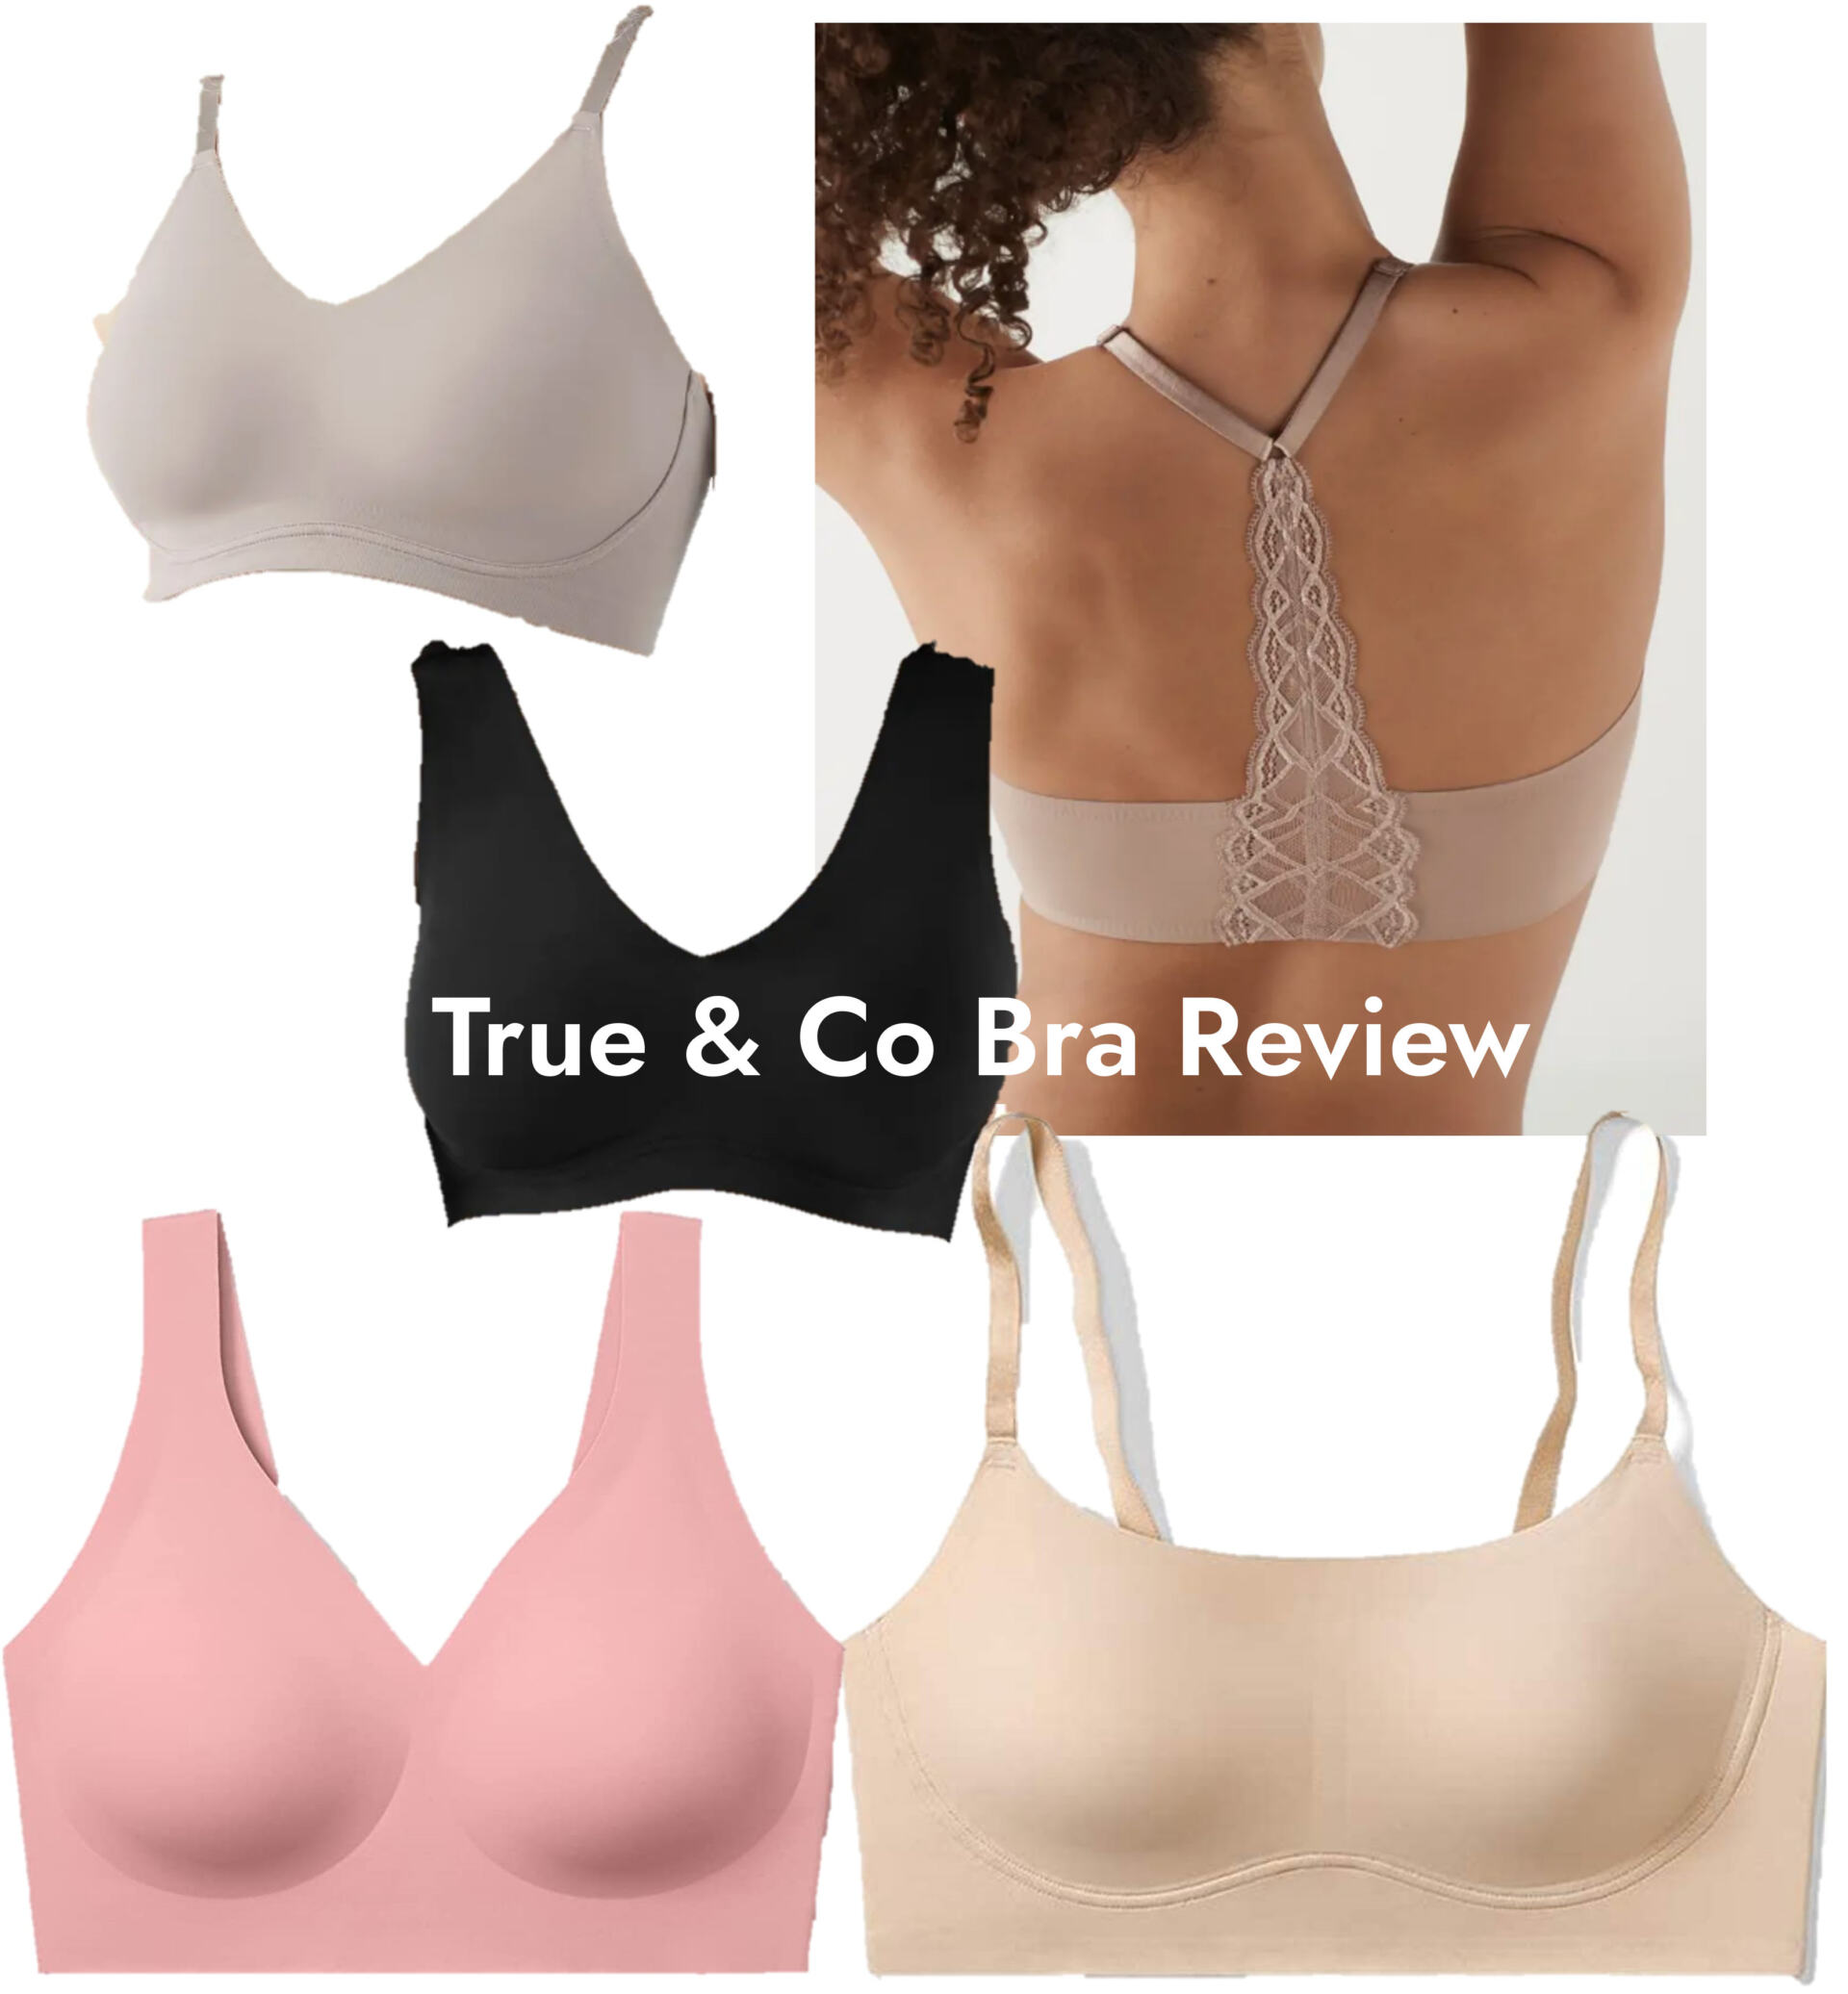 True and Co's Comfortable Bras Are on Sale at Nordstrom